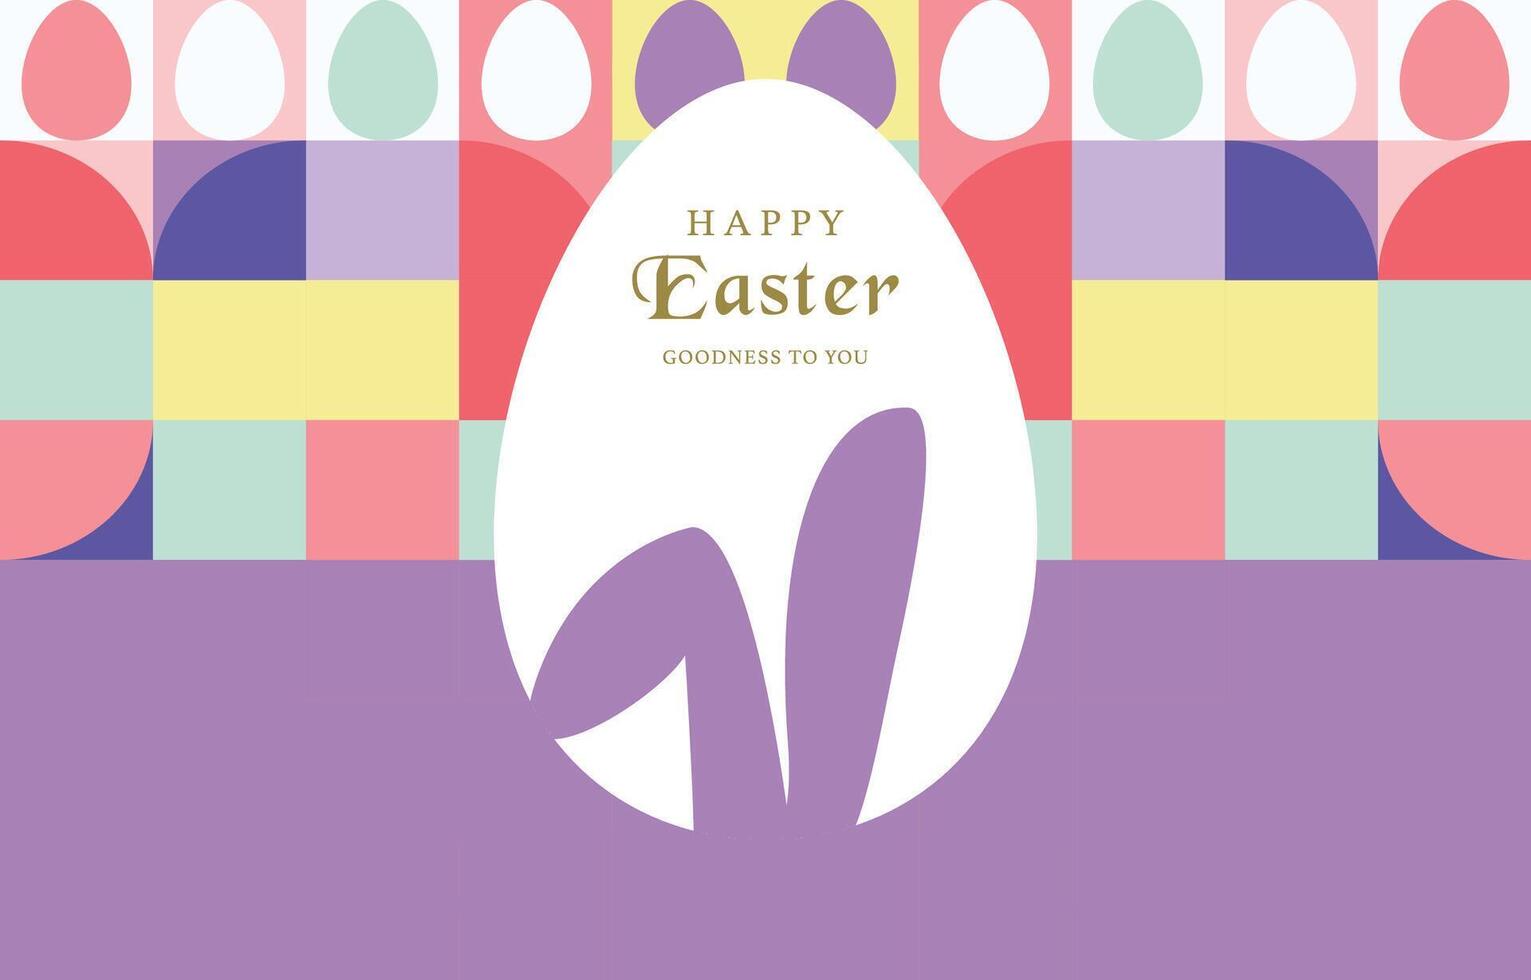 Easter day background for horizontal banner design with geometric style vector